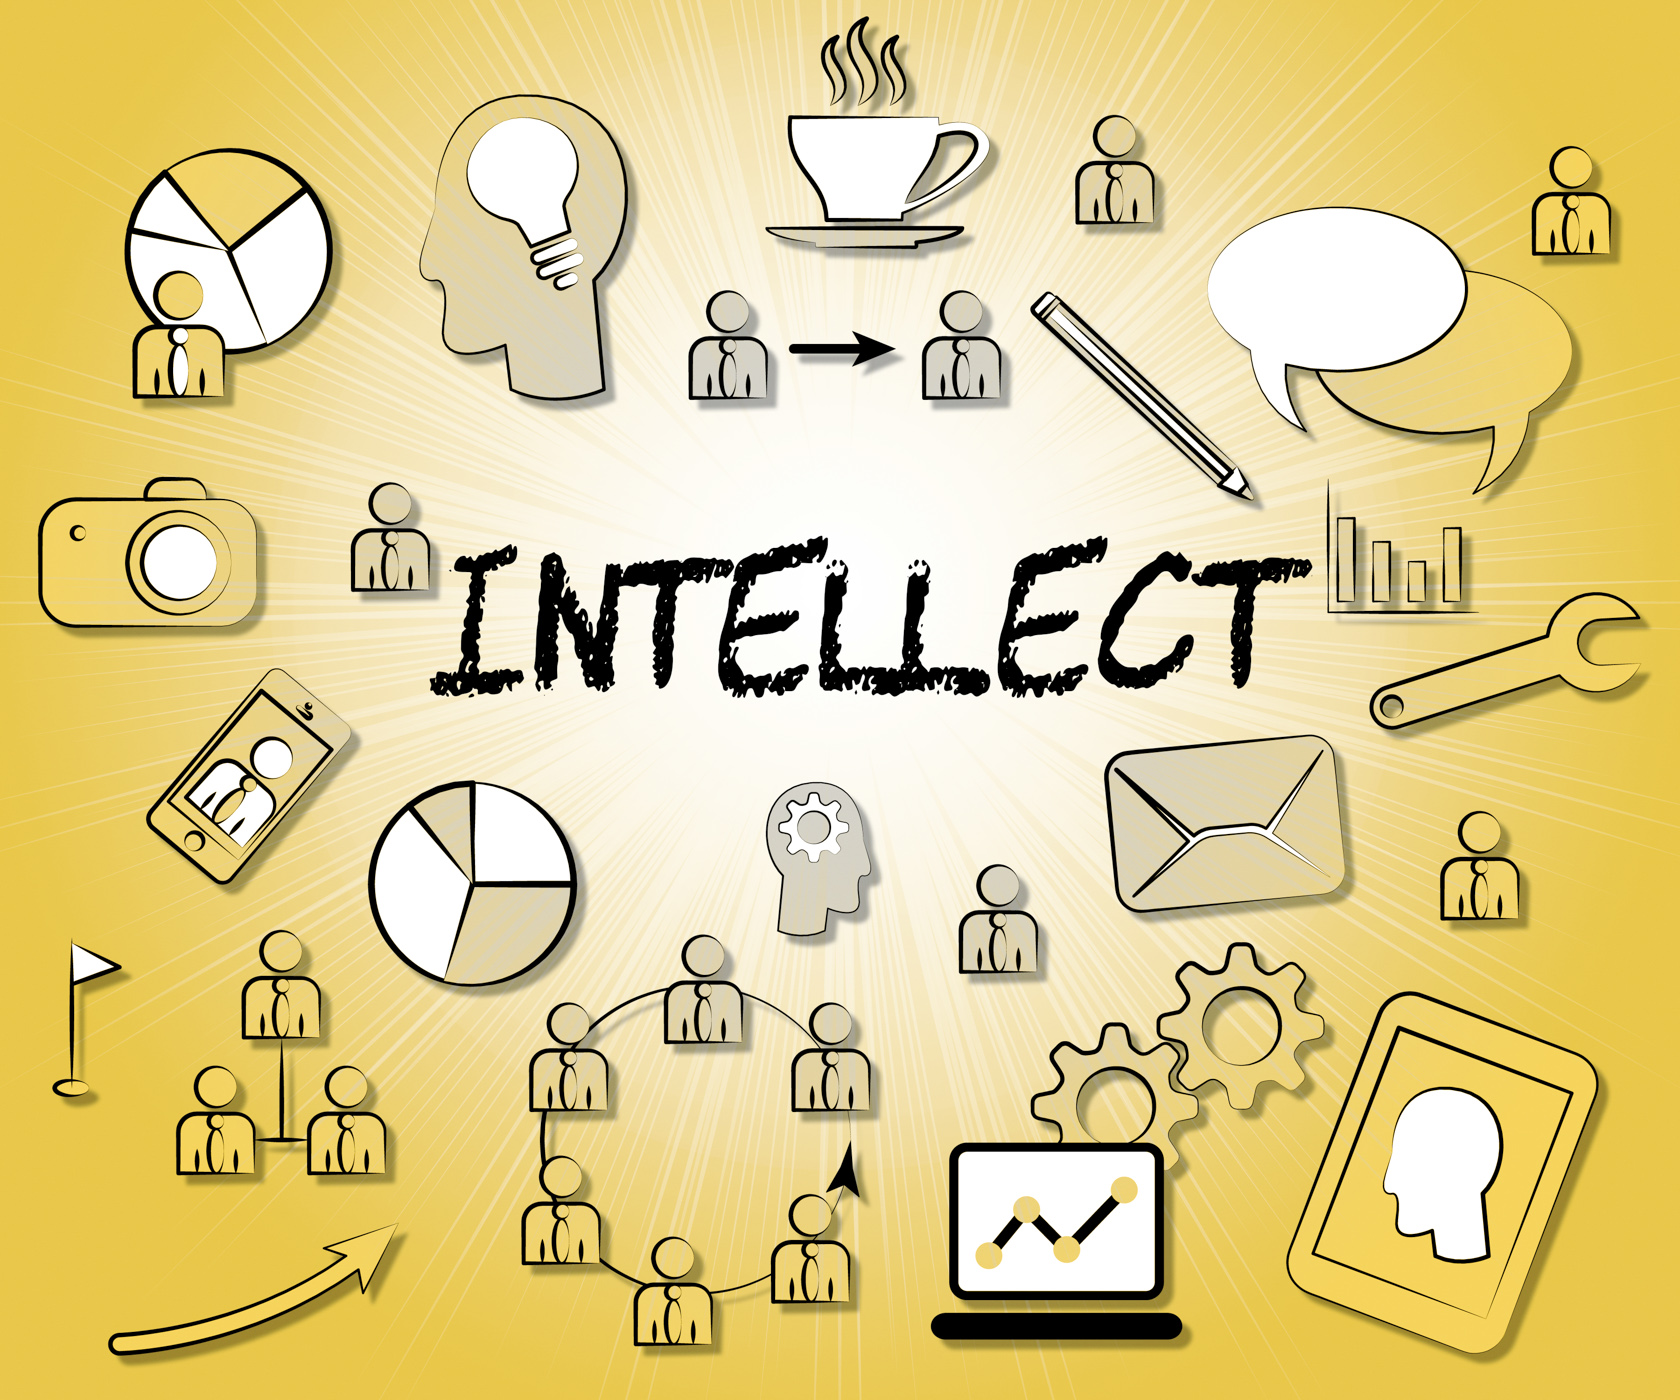 Intellect icons represents intellectual capacity and ability photo